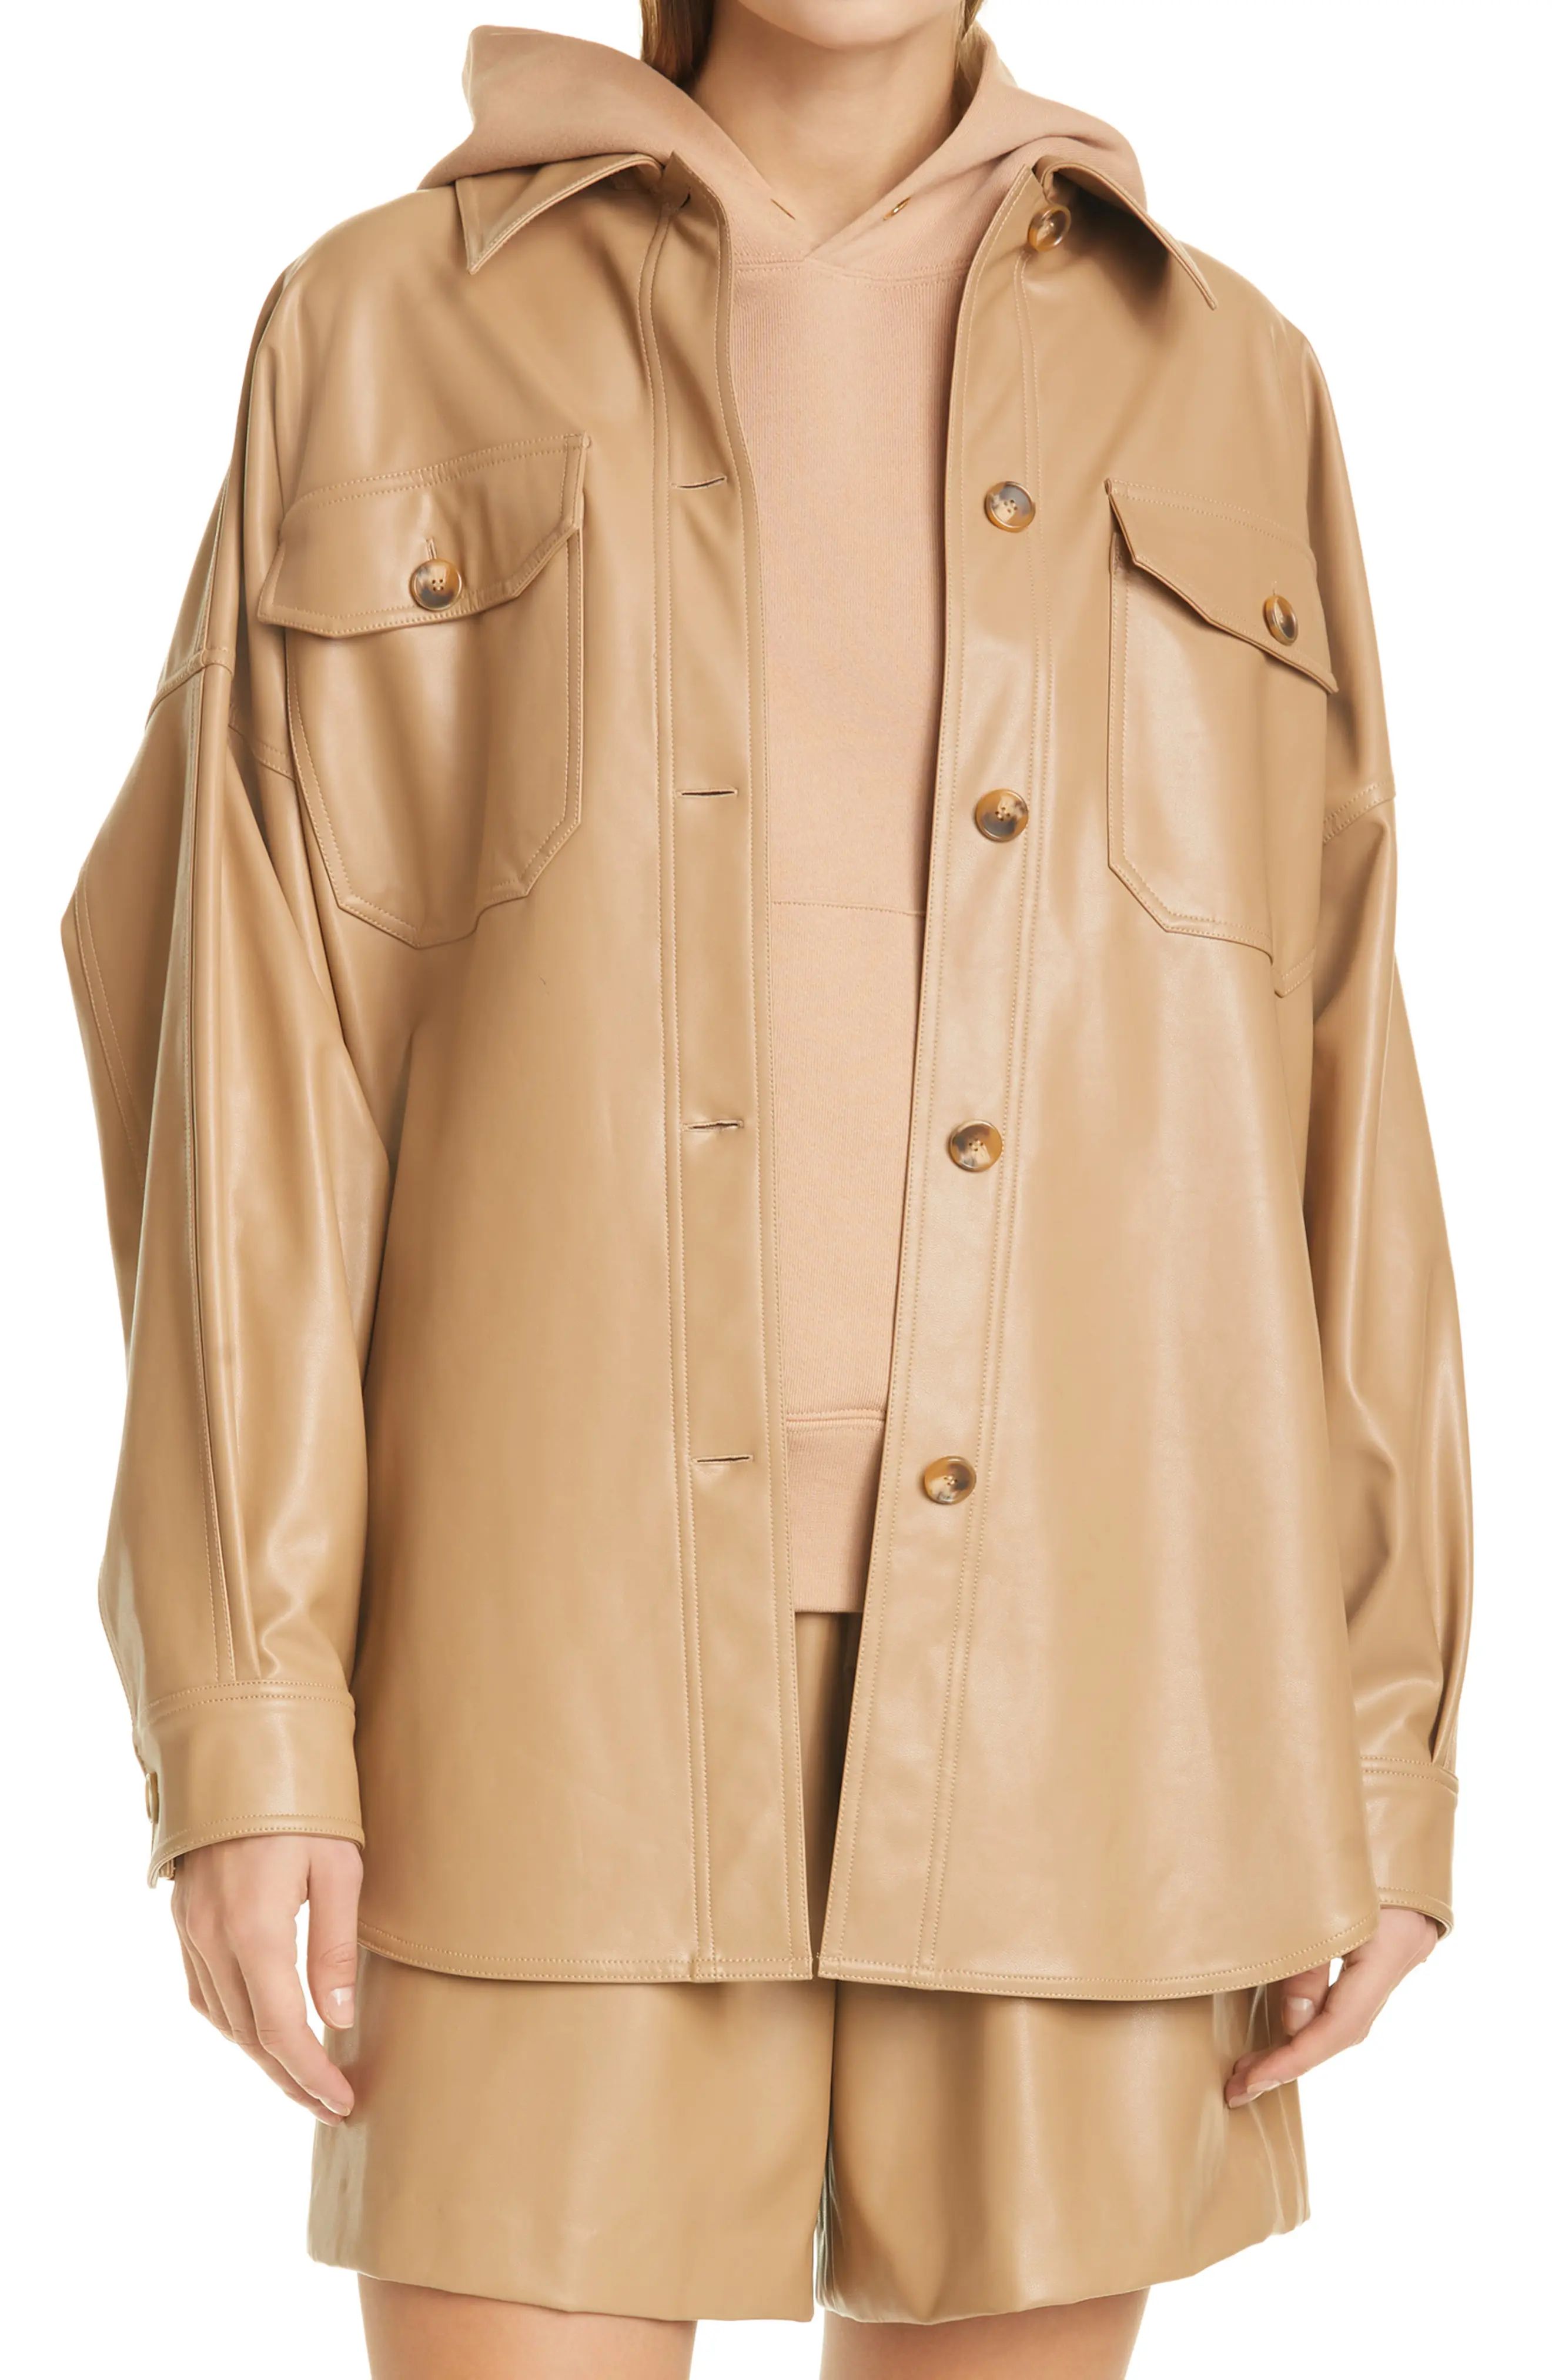 A.L.C. Wellsley Oversize Faux Leather Jacket, Size Small in Desert Beige at Nordstrom | Nordstrom